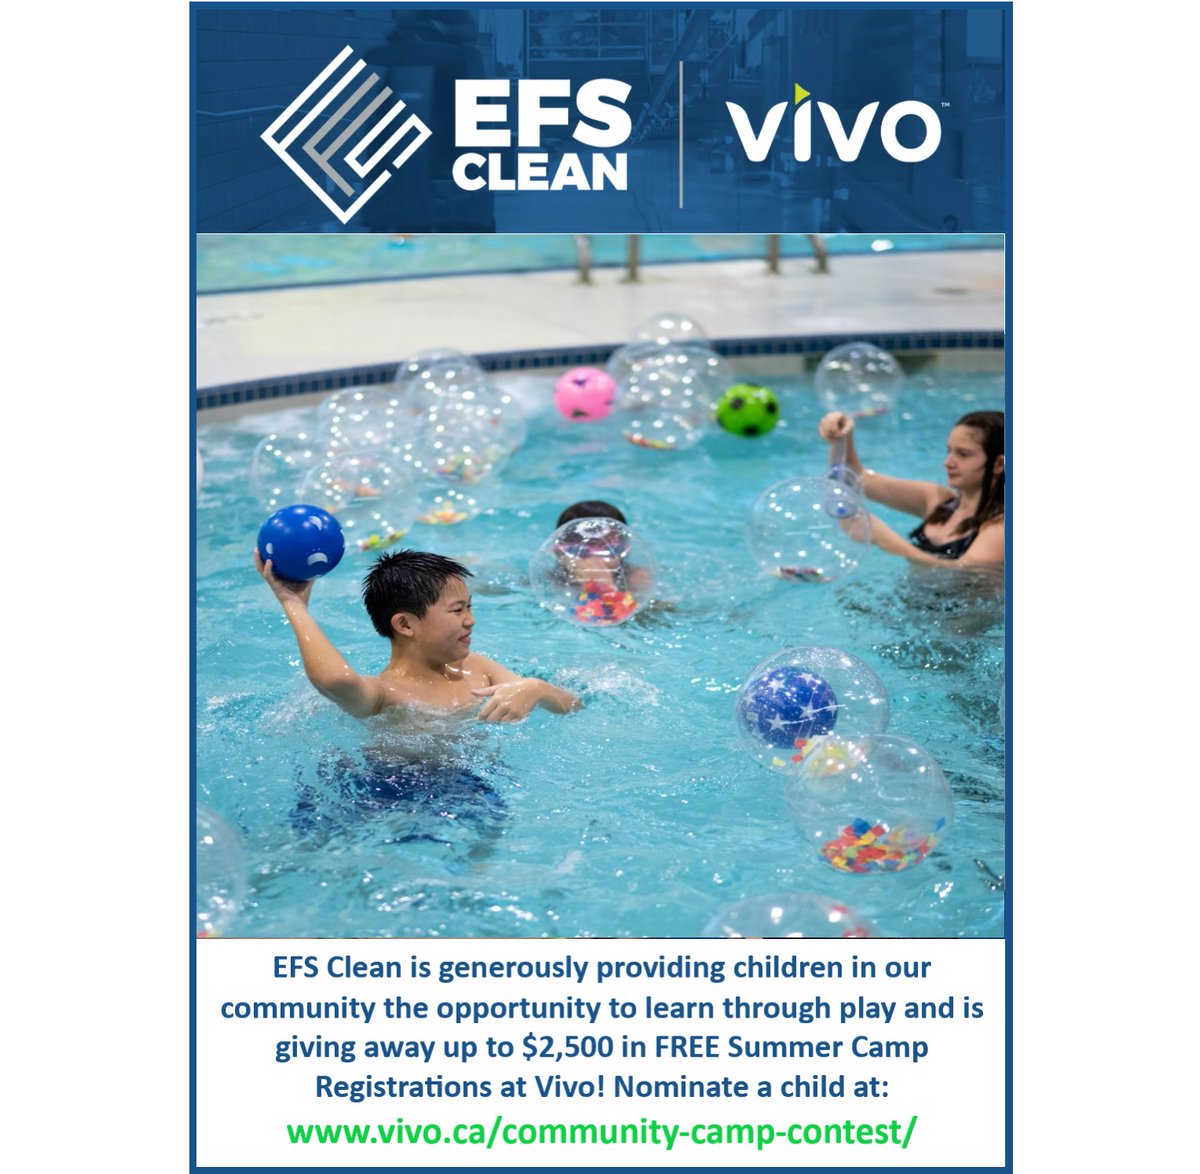 Some lucky kids will win a FREE summer camp at Vivo for Healthier Generations! #Calgary #communitylove #cleaningservices